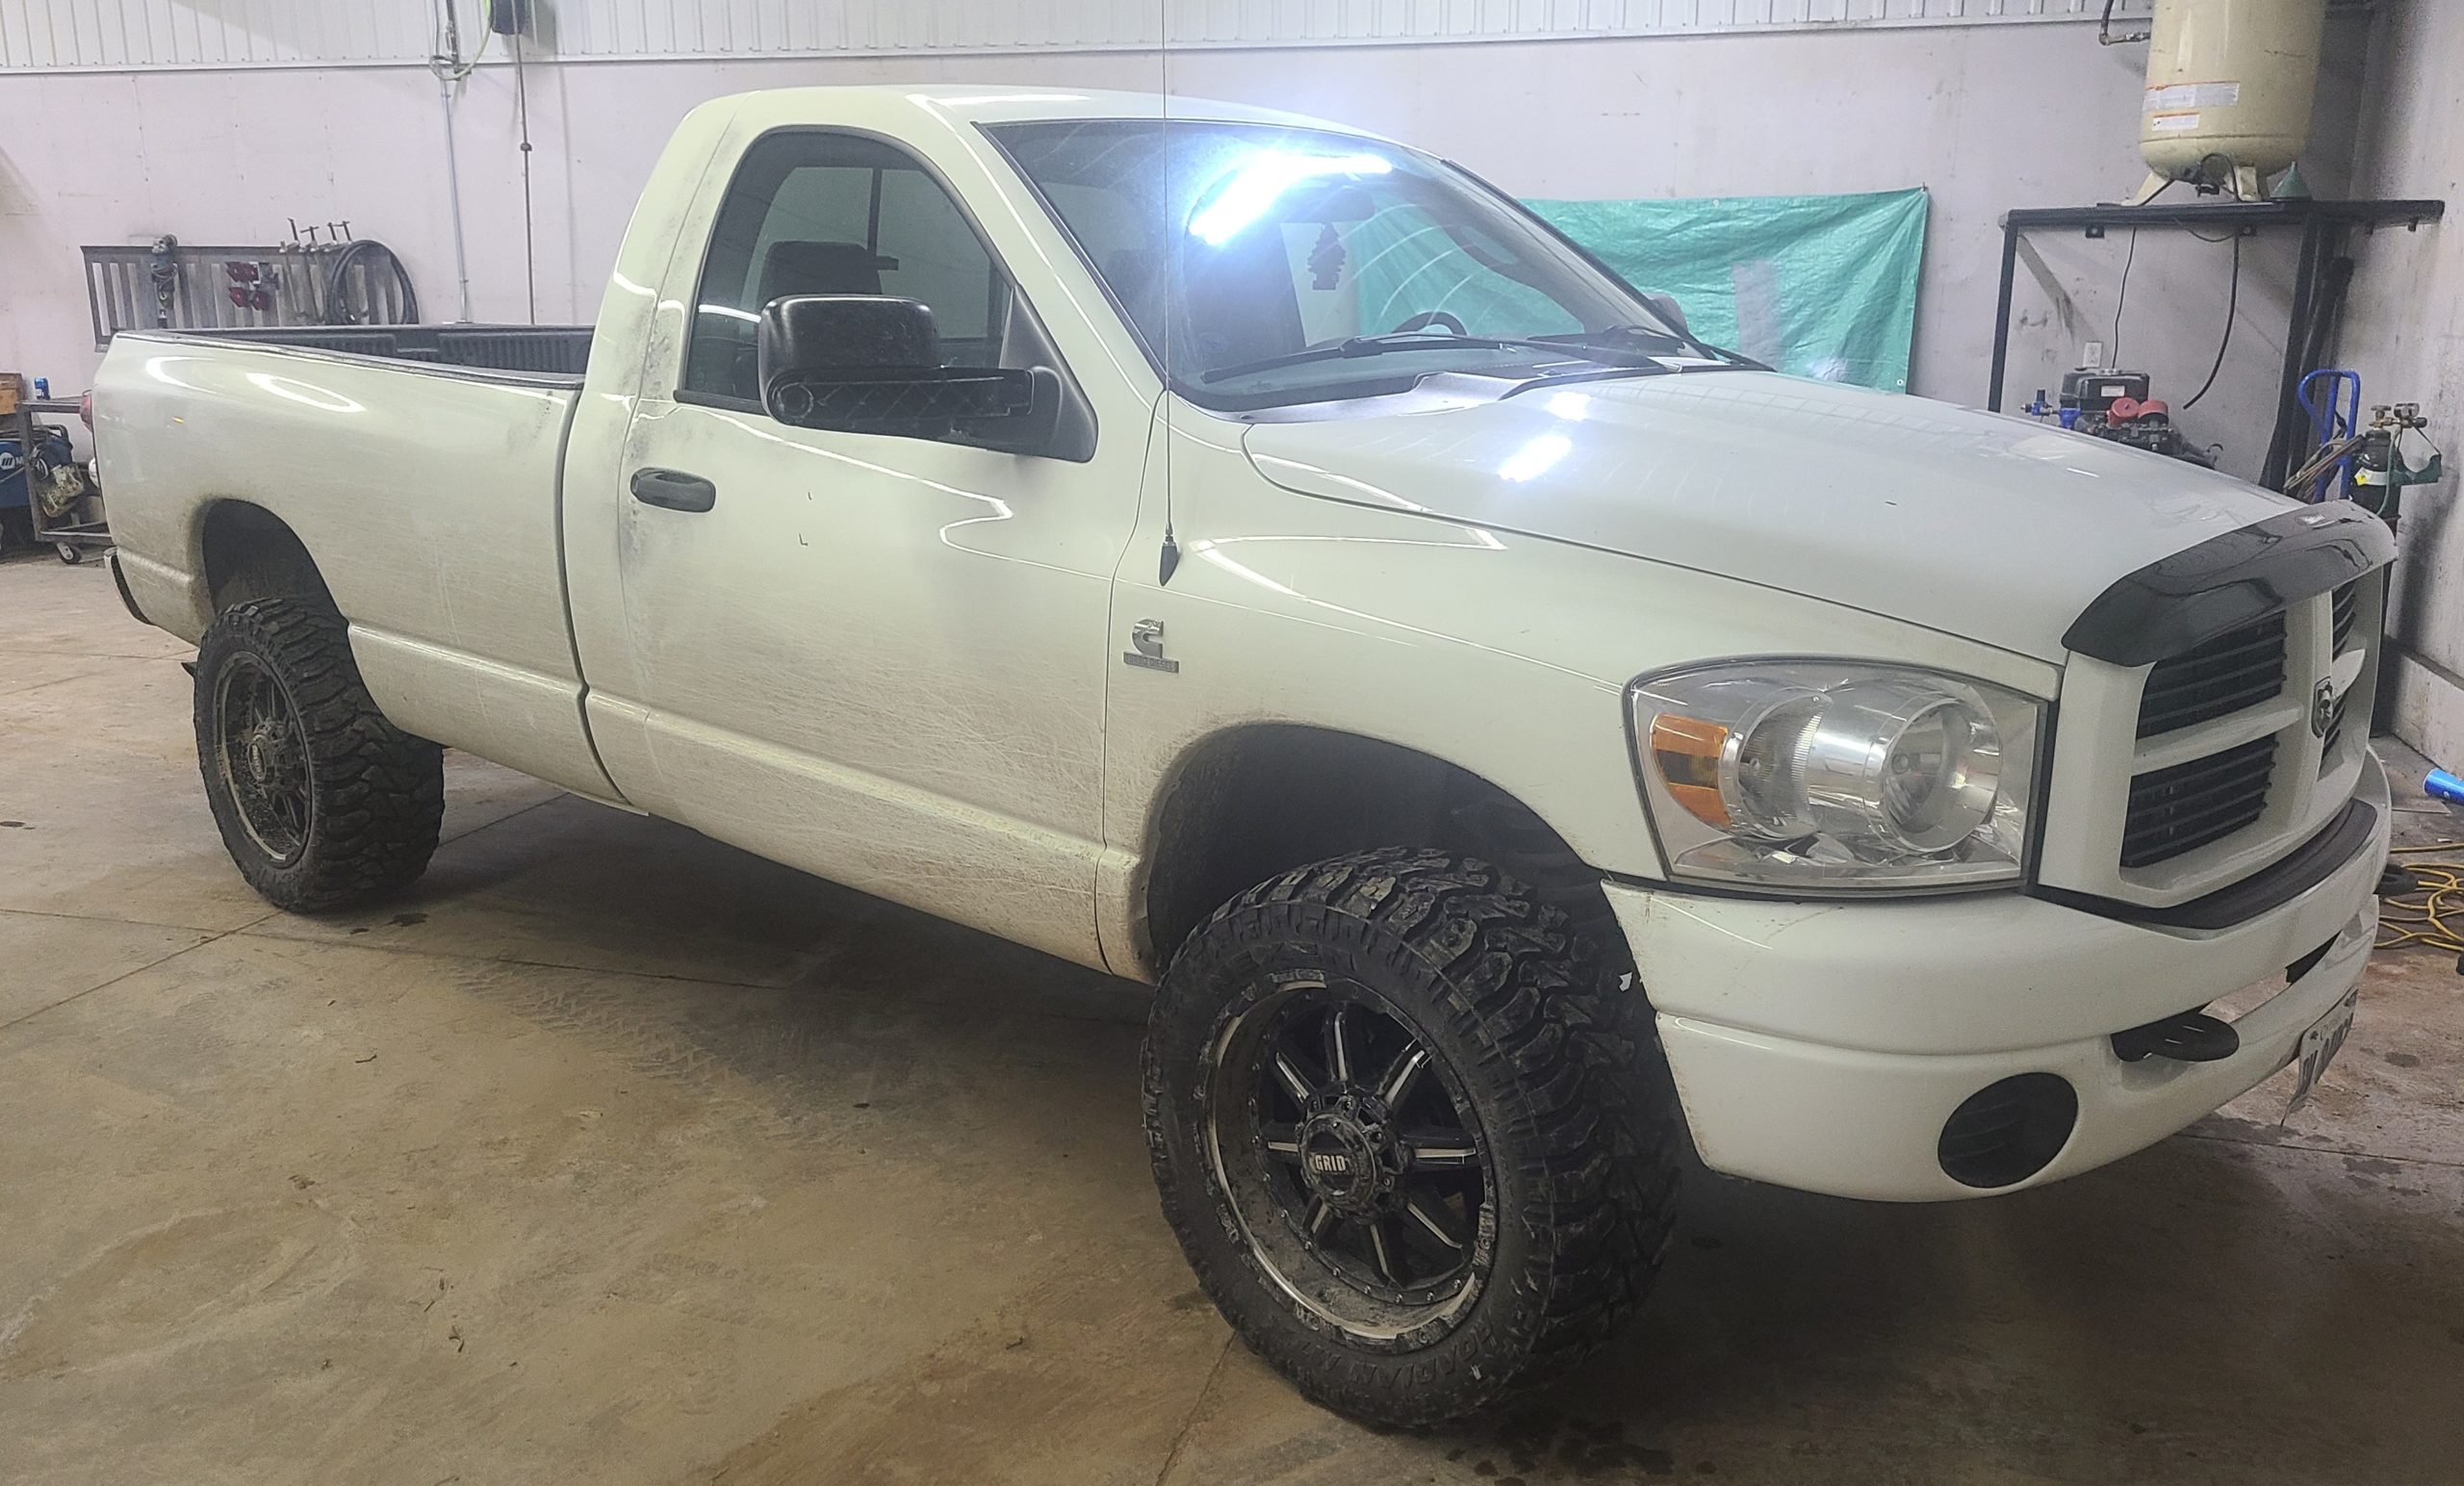 police looking for stolen pickup scaled